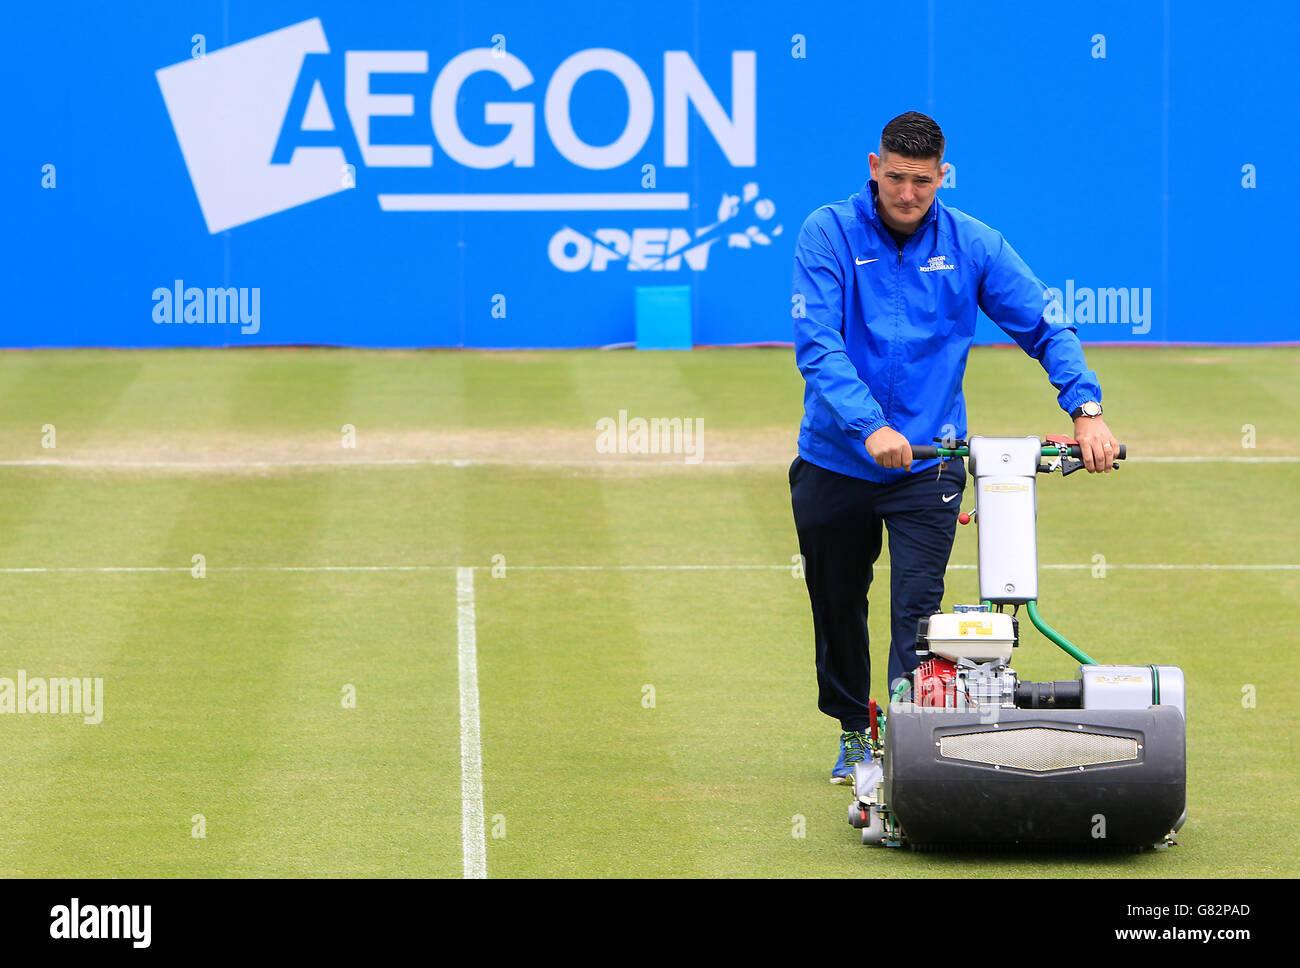 Tennis - 2015 Aegon Open Nottingham - Day Five - Nottingham Tennis Centre. Ground staff mow Centre Court prior to the start of play Stock Photo